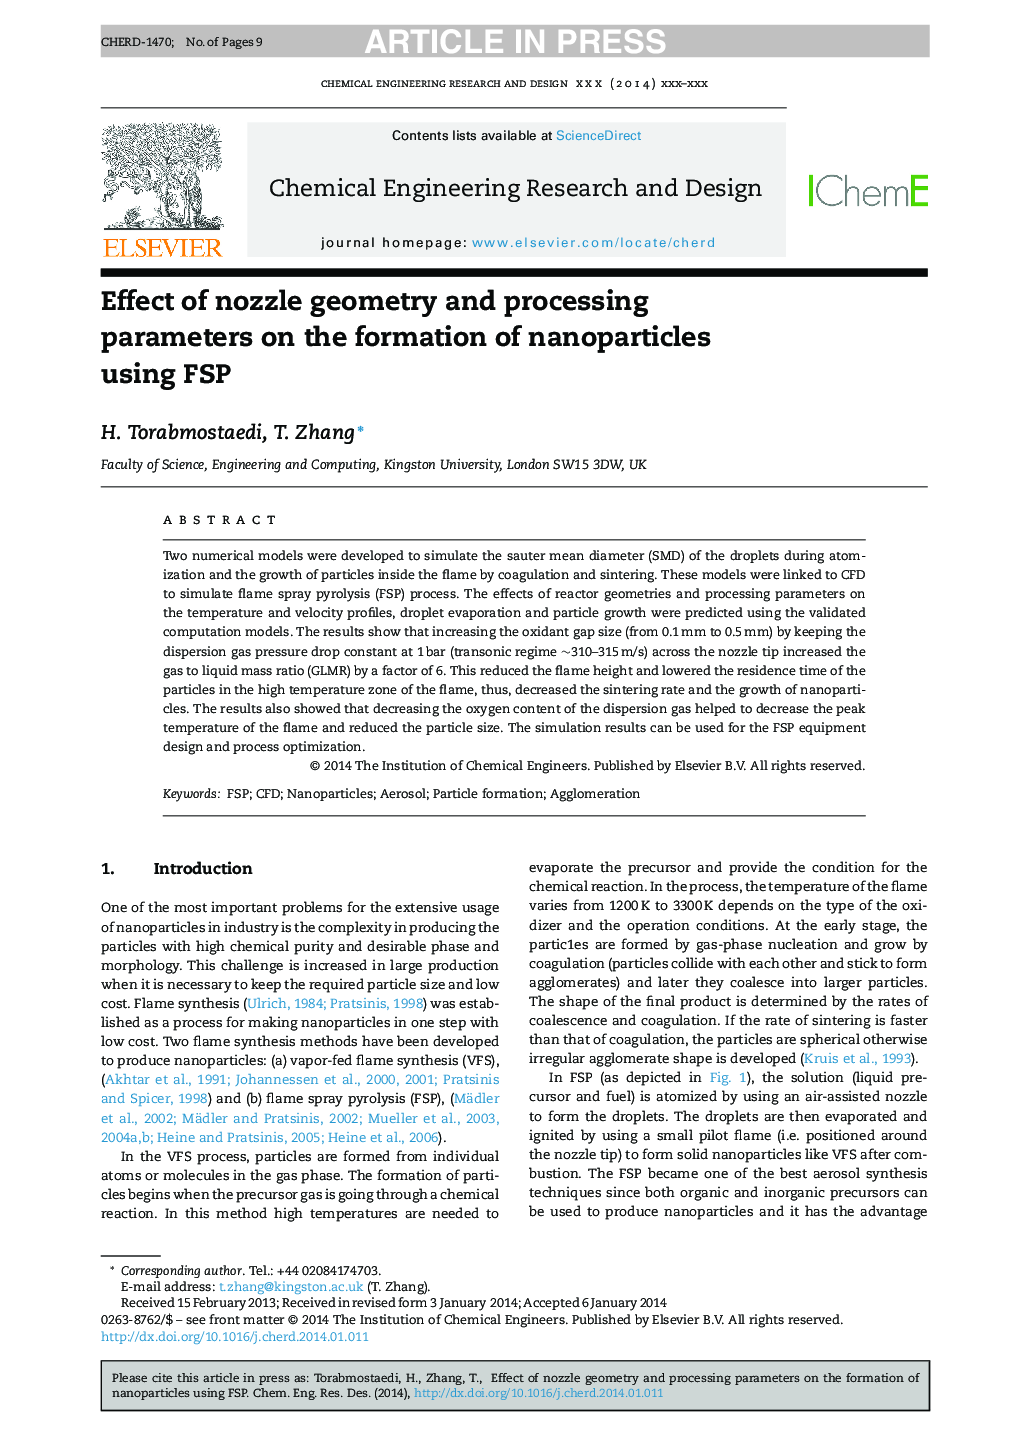 Effect of nozzle geometry and processing parameters on the formation of nanoparticles using FSP